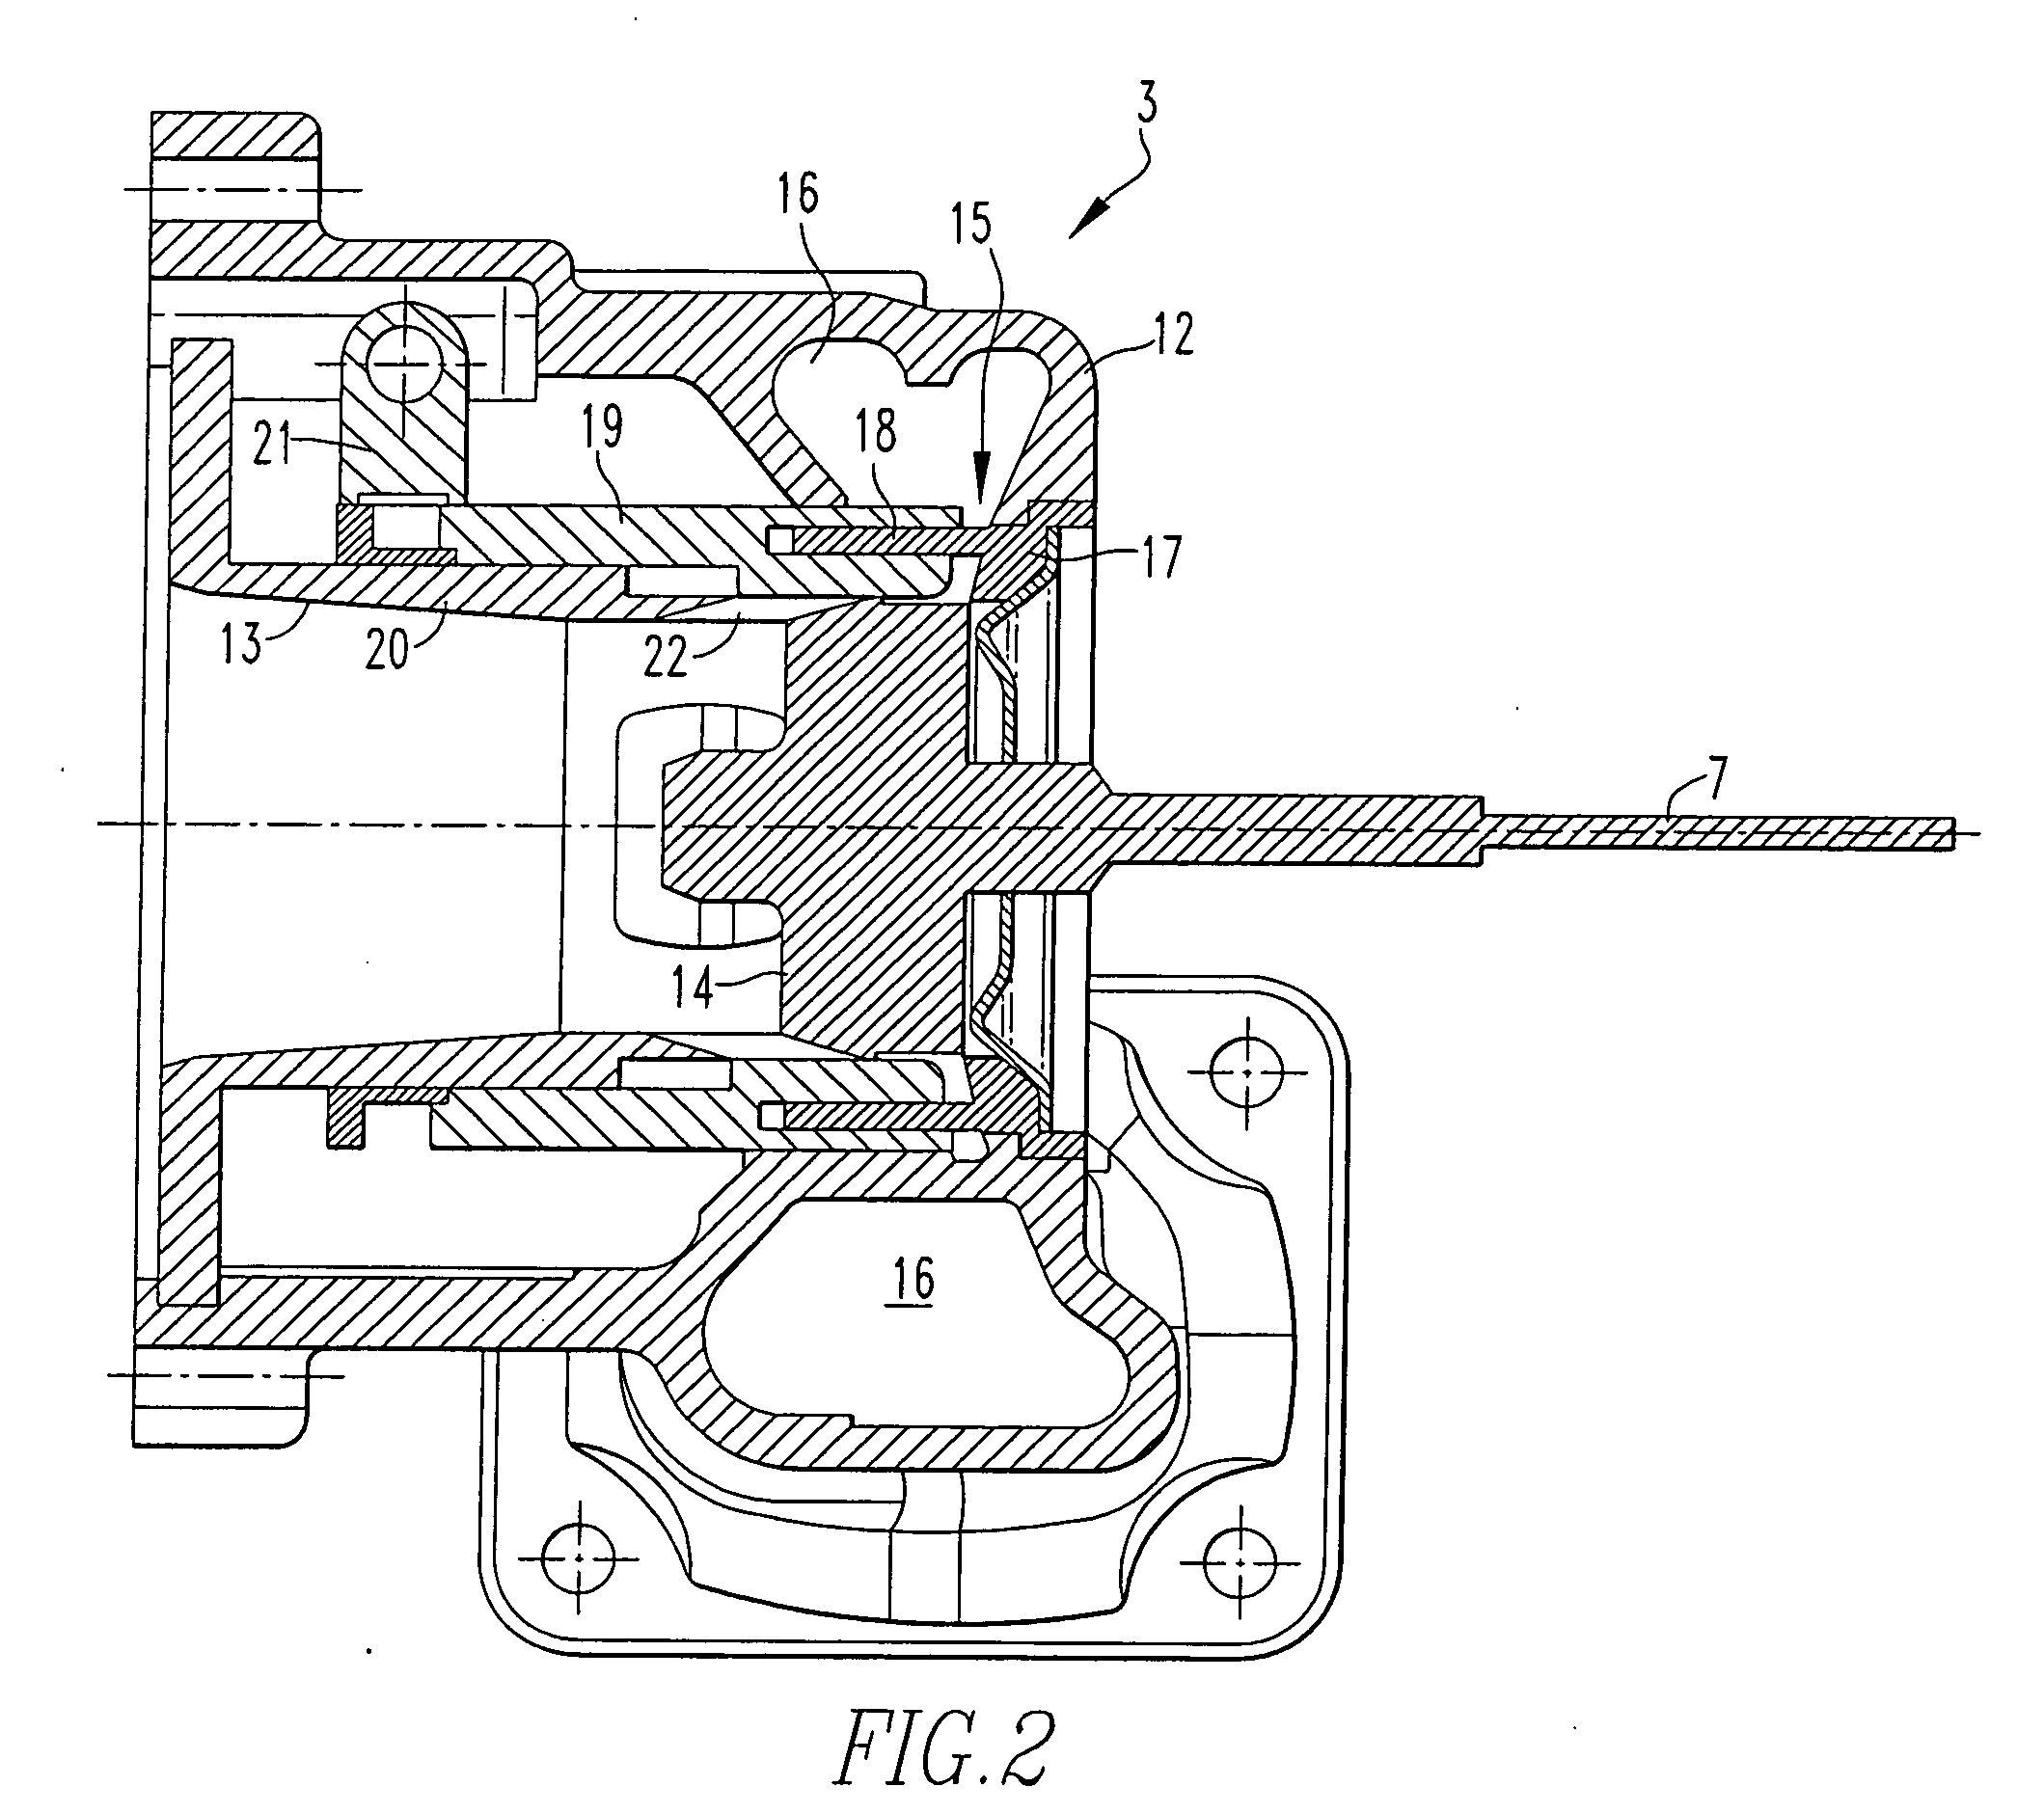 Exhaust-gas turbine in an exhaust-gas turbocharger